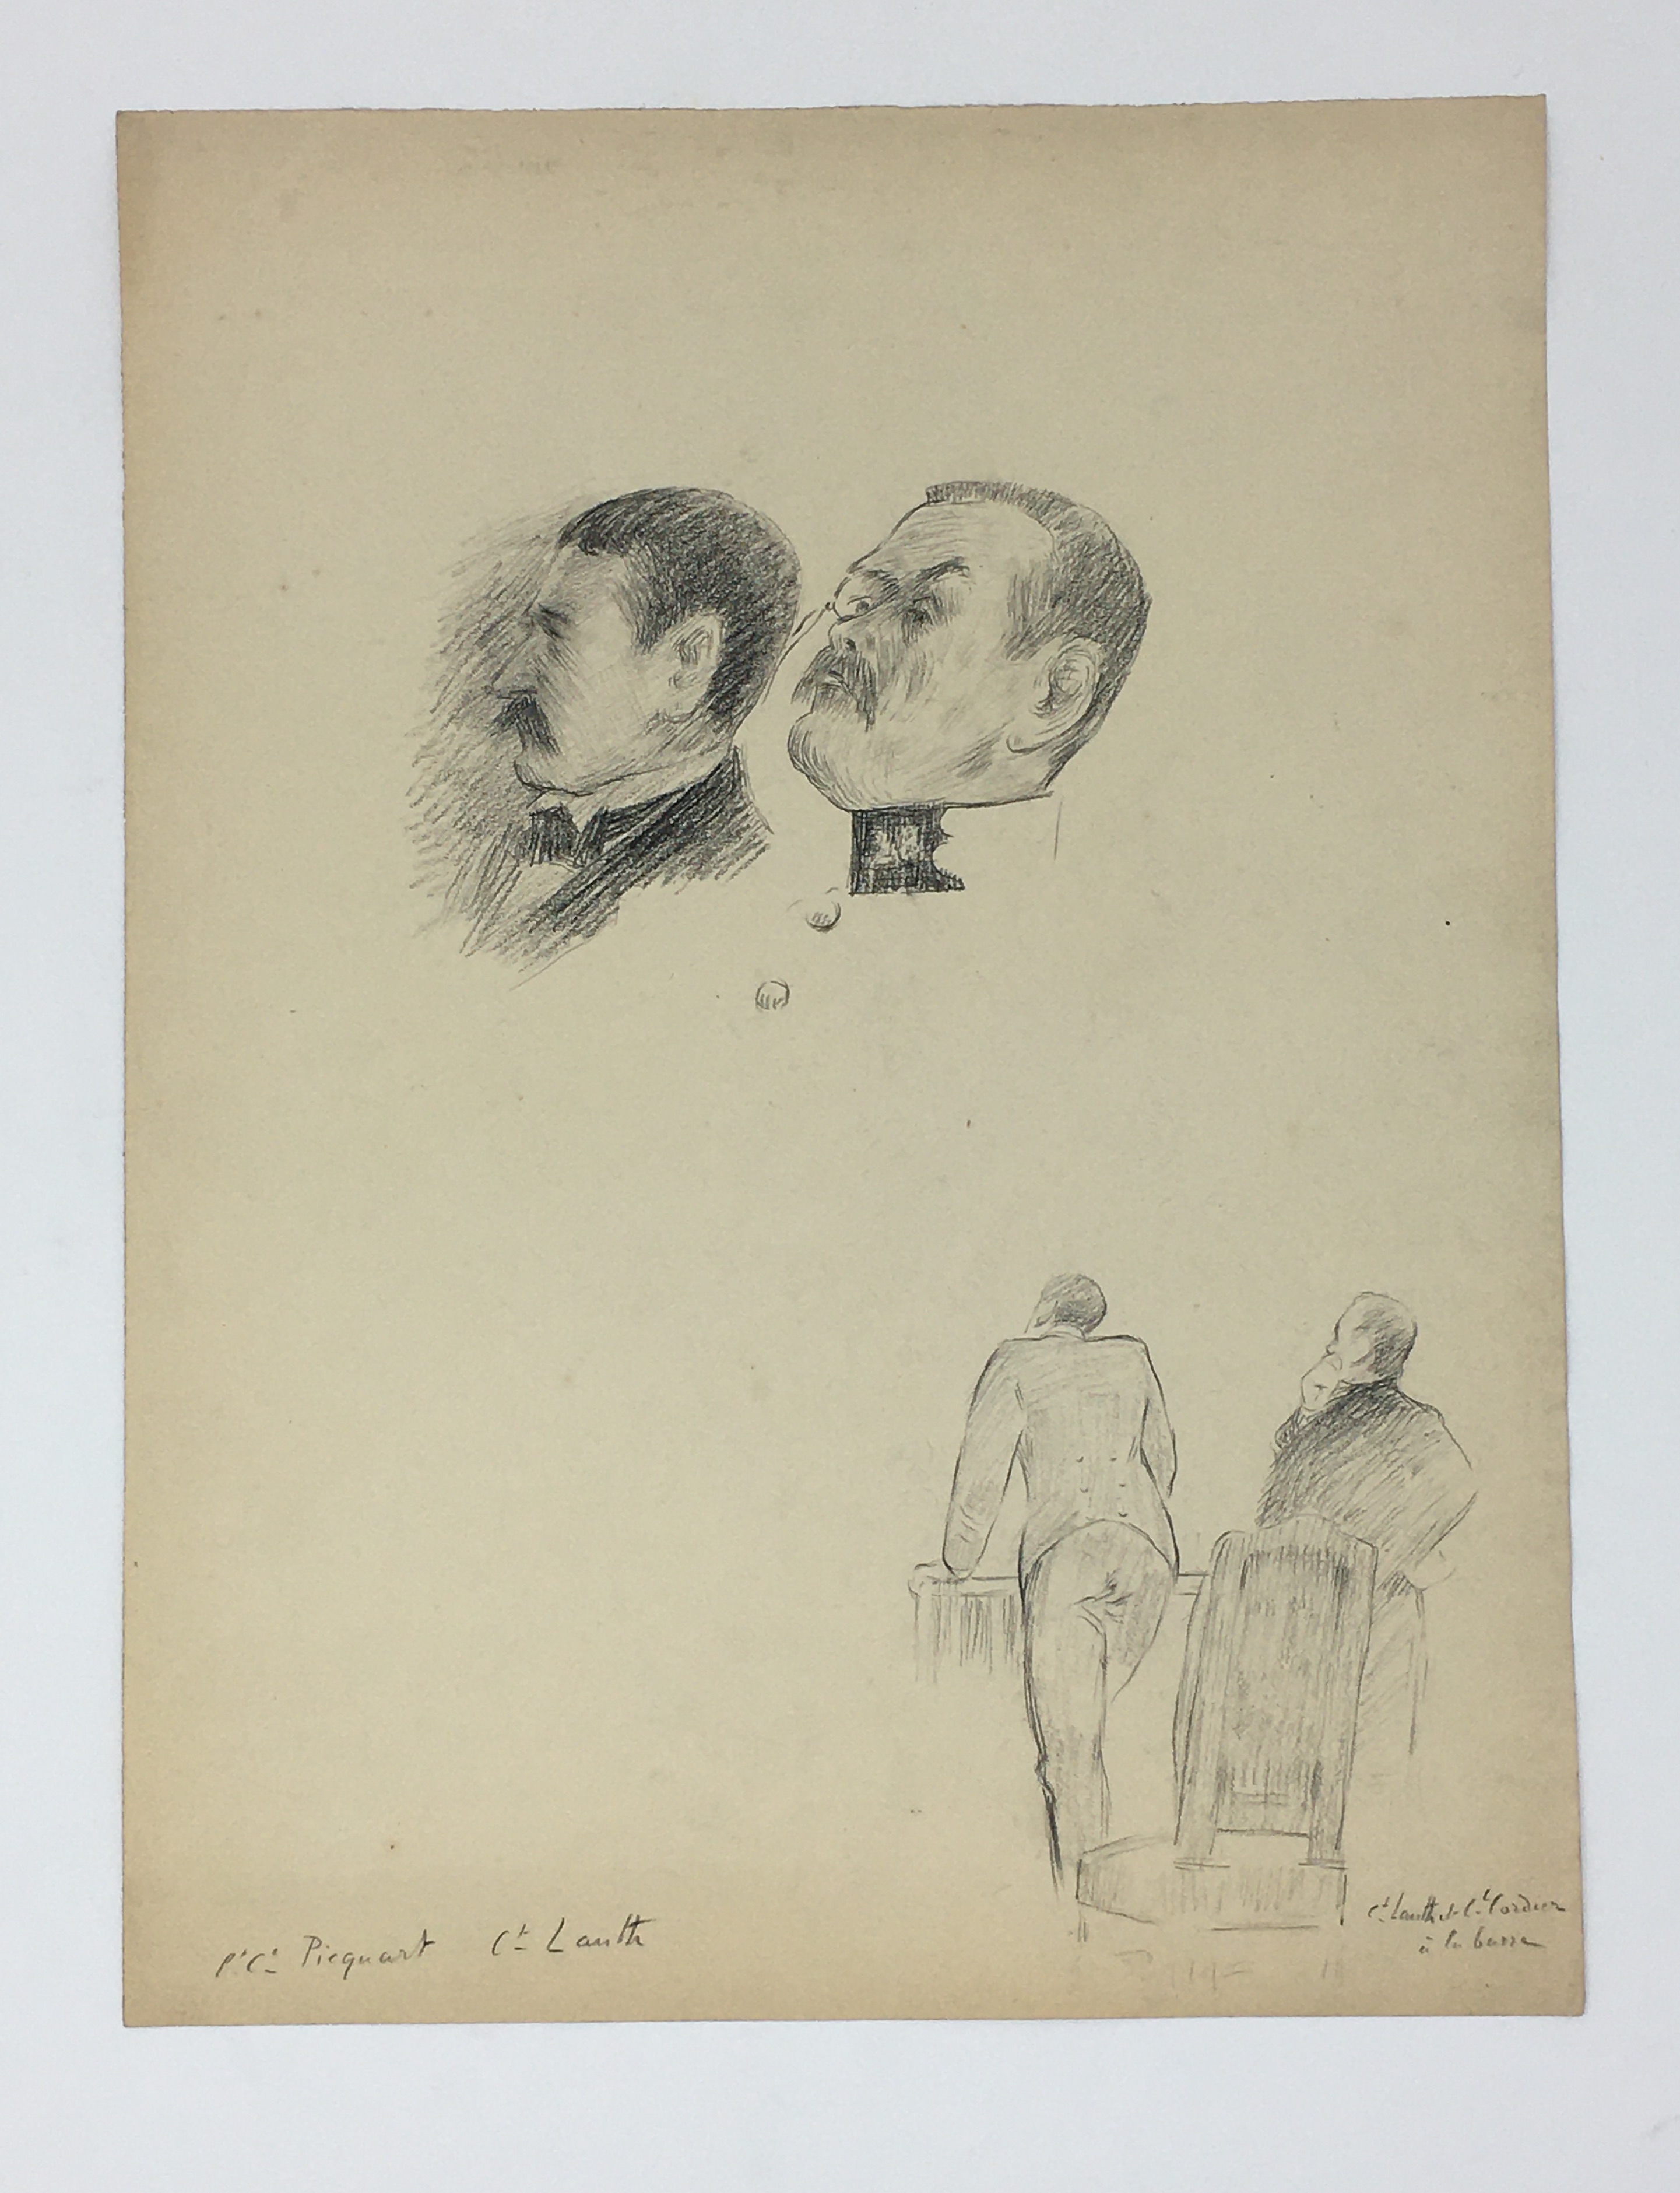 J'Accuse Newspaper, Emile Zola Quote, Signed Dreyfus Portrait, Rare Trial Drawings & Schwartzkoppen - Image 48 of 74